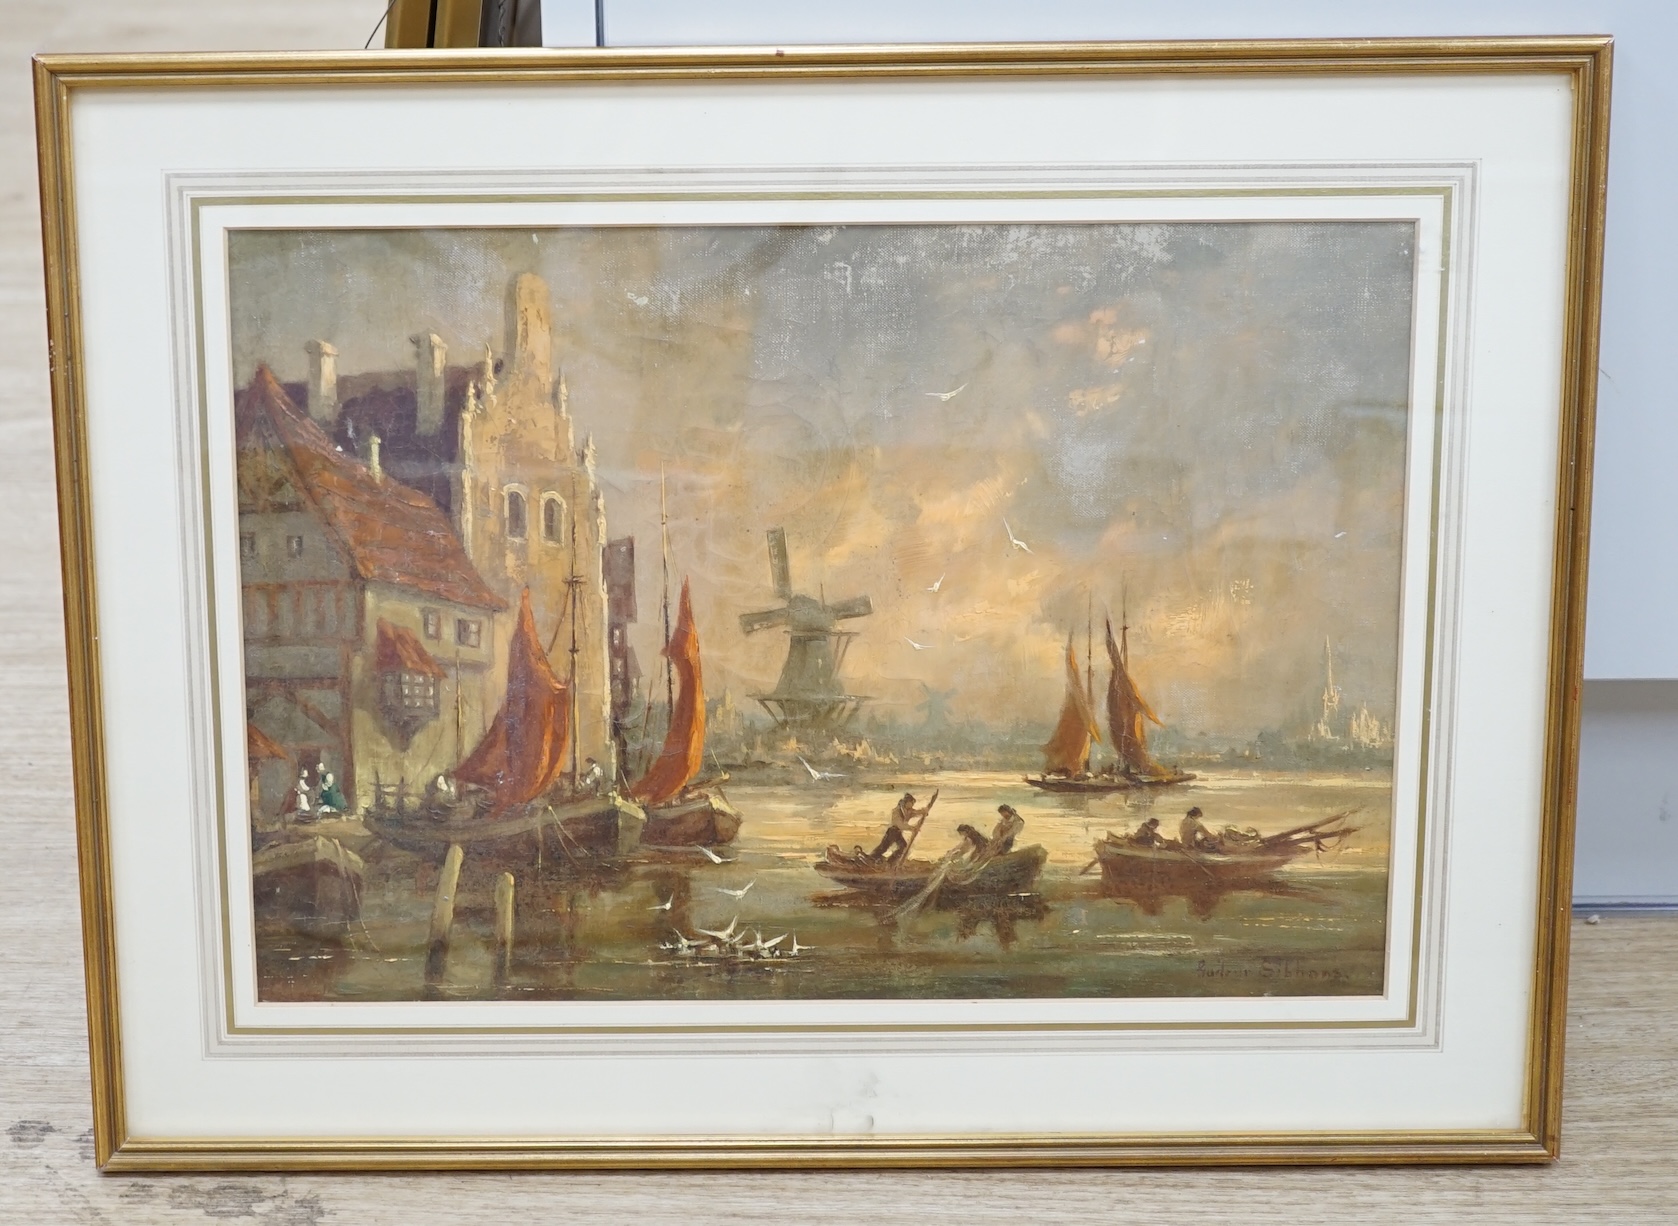 Gudrun Sibbons (German, 1925-2000), oil on canvas, Dutch harbour view with fishing boats, signed, 28 x 41cm. Condition - poor to fair, craquelure throughout